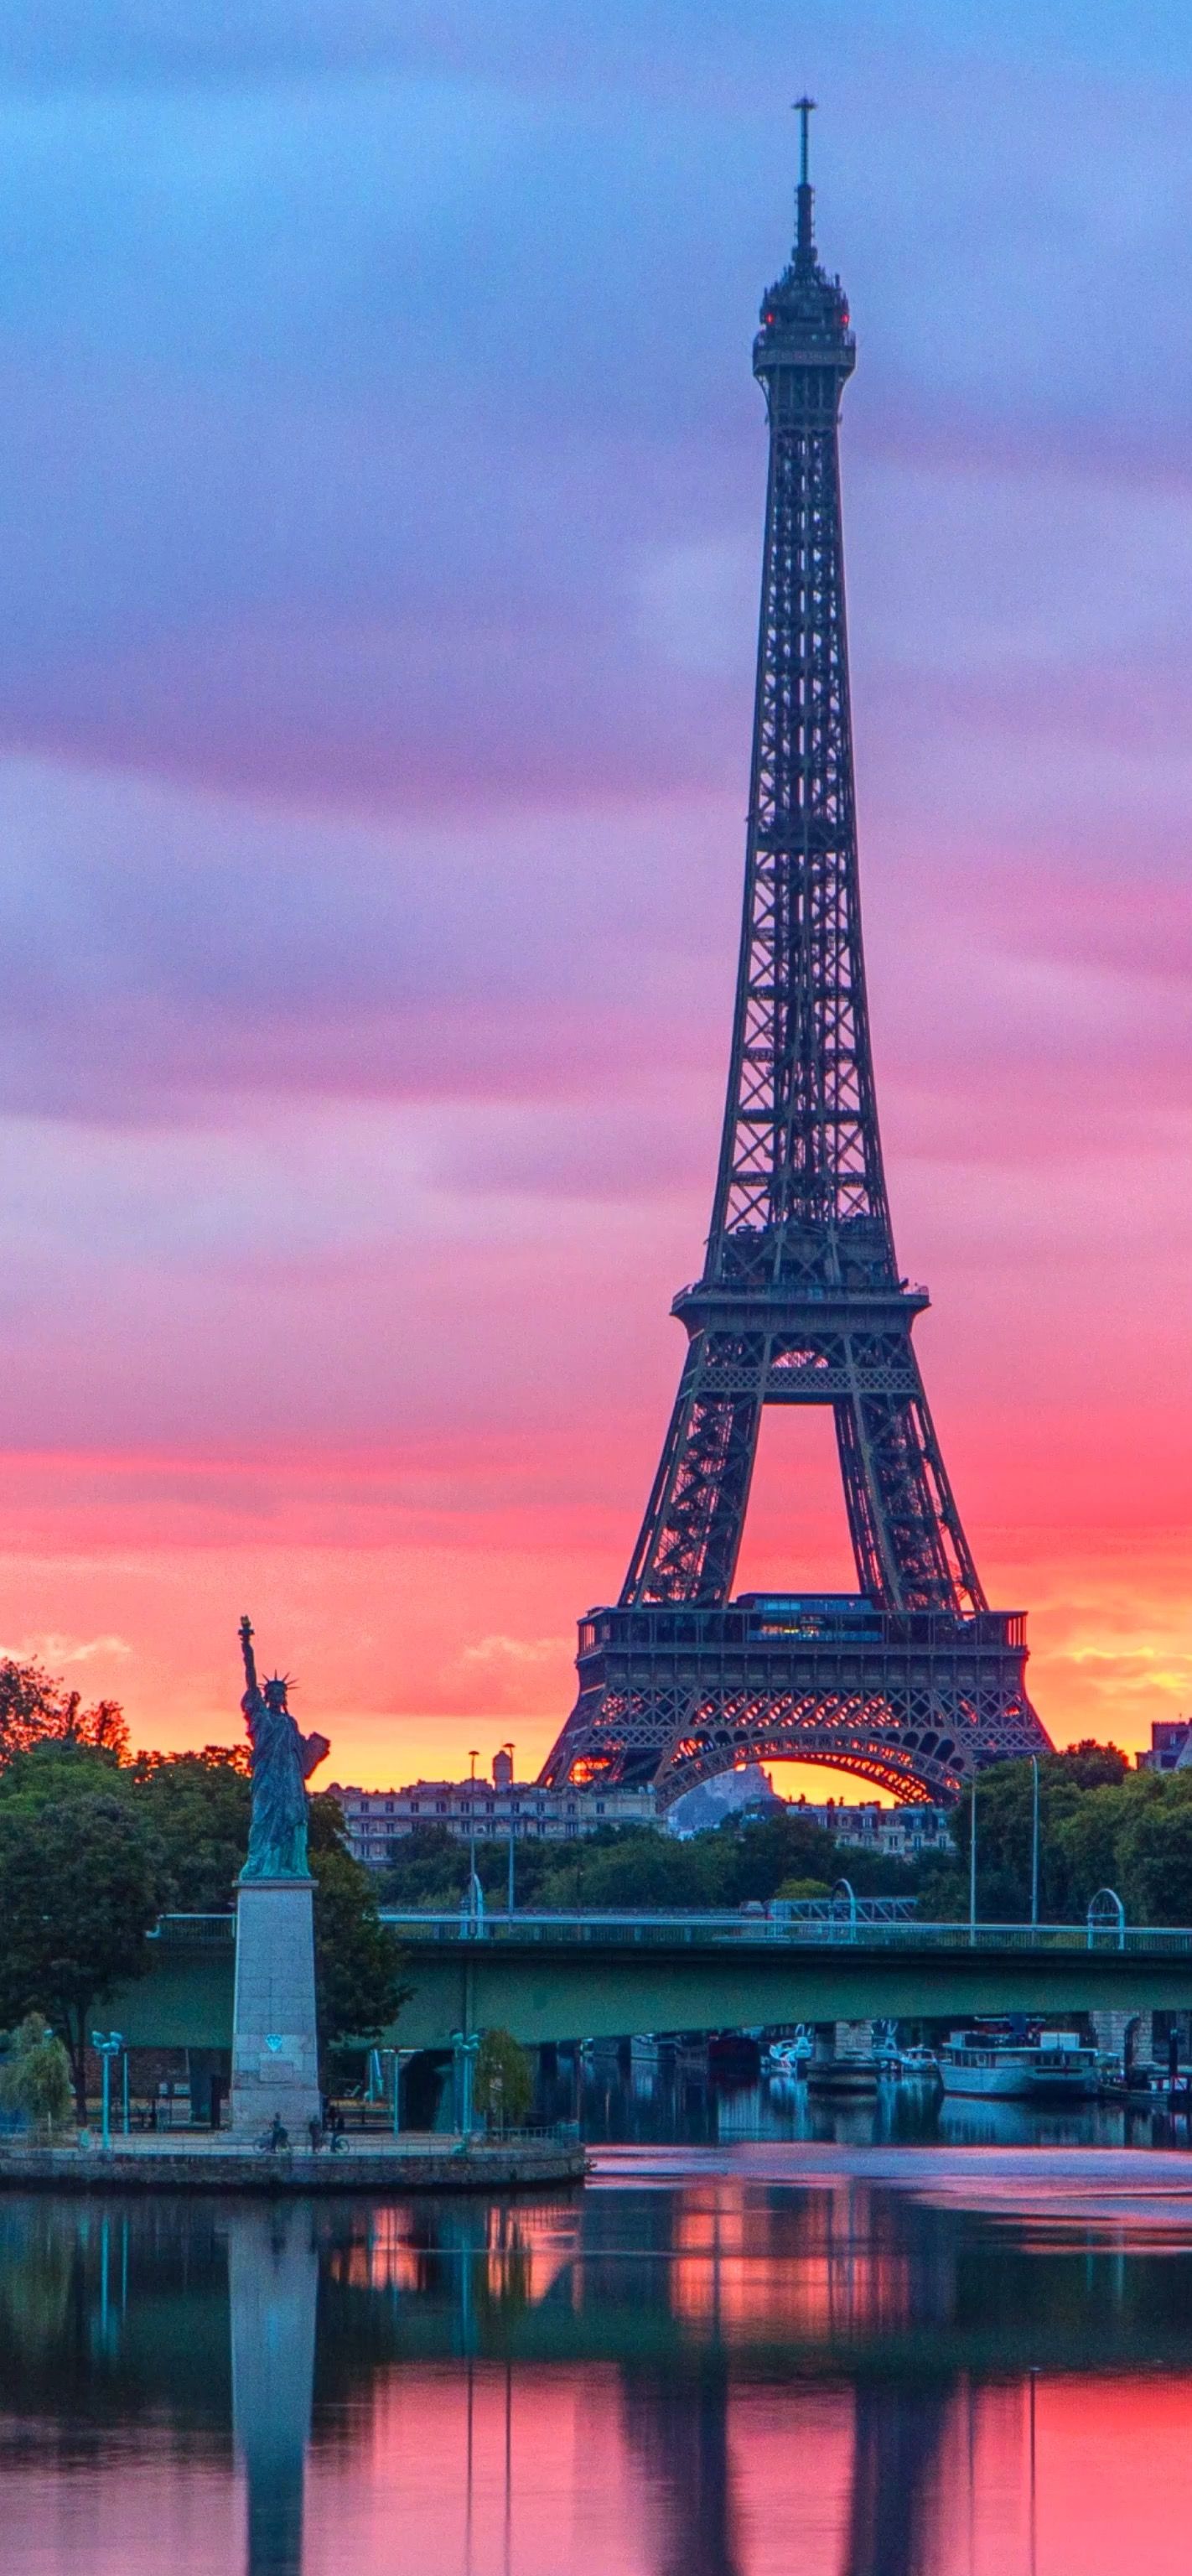 Eiffel Tower and Statue of Liberty wallpaper for your iPhone X from Everpix wallpaper app - Paris, Eiffel Tower